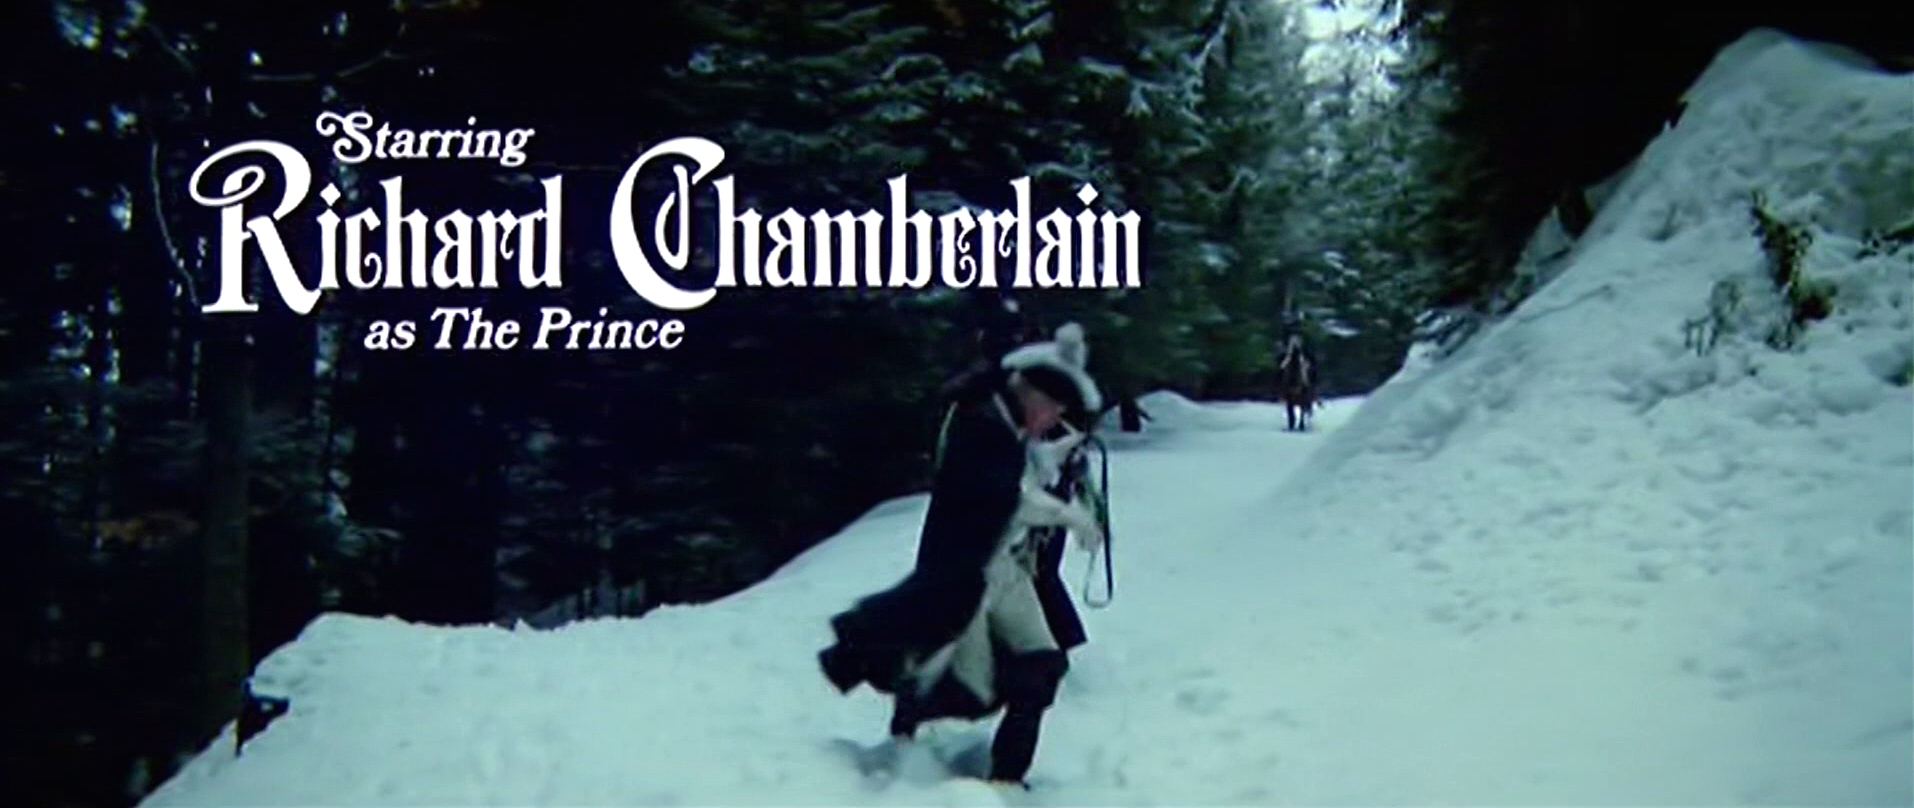 Main title from The Slipper and the Rose (1976) (4). Starring Richard Chamberlain as The Prince